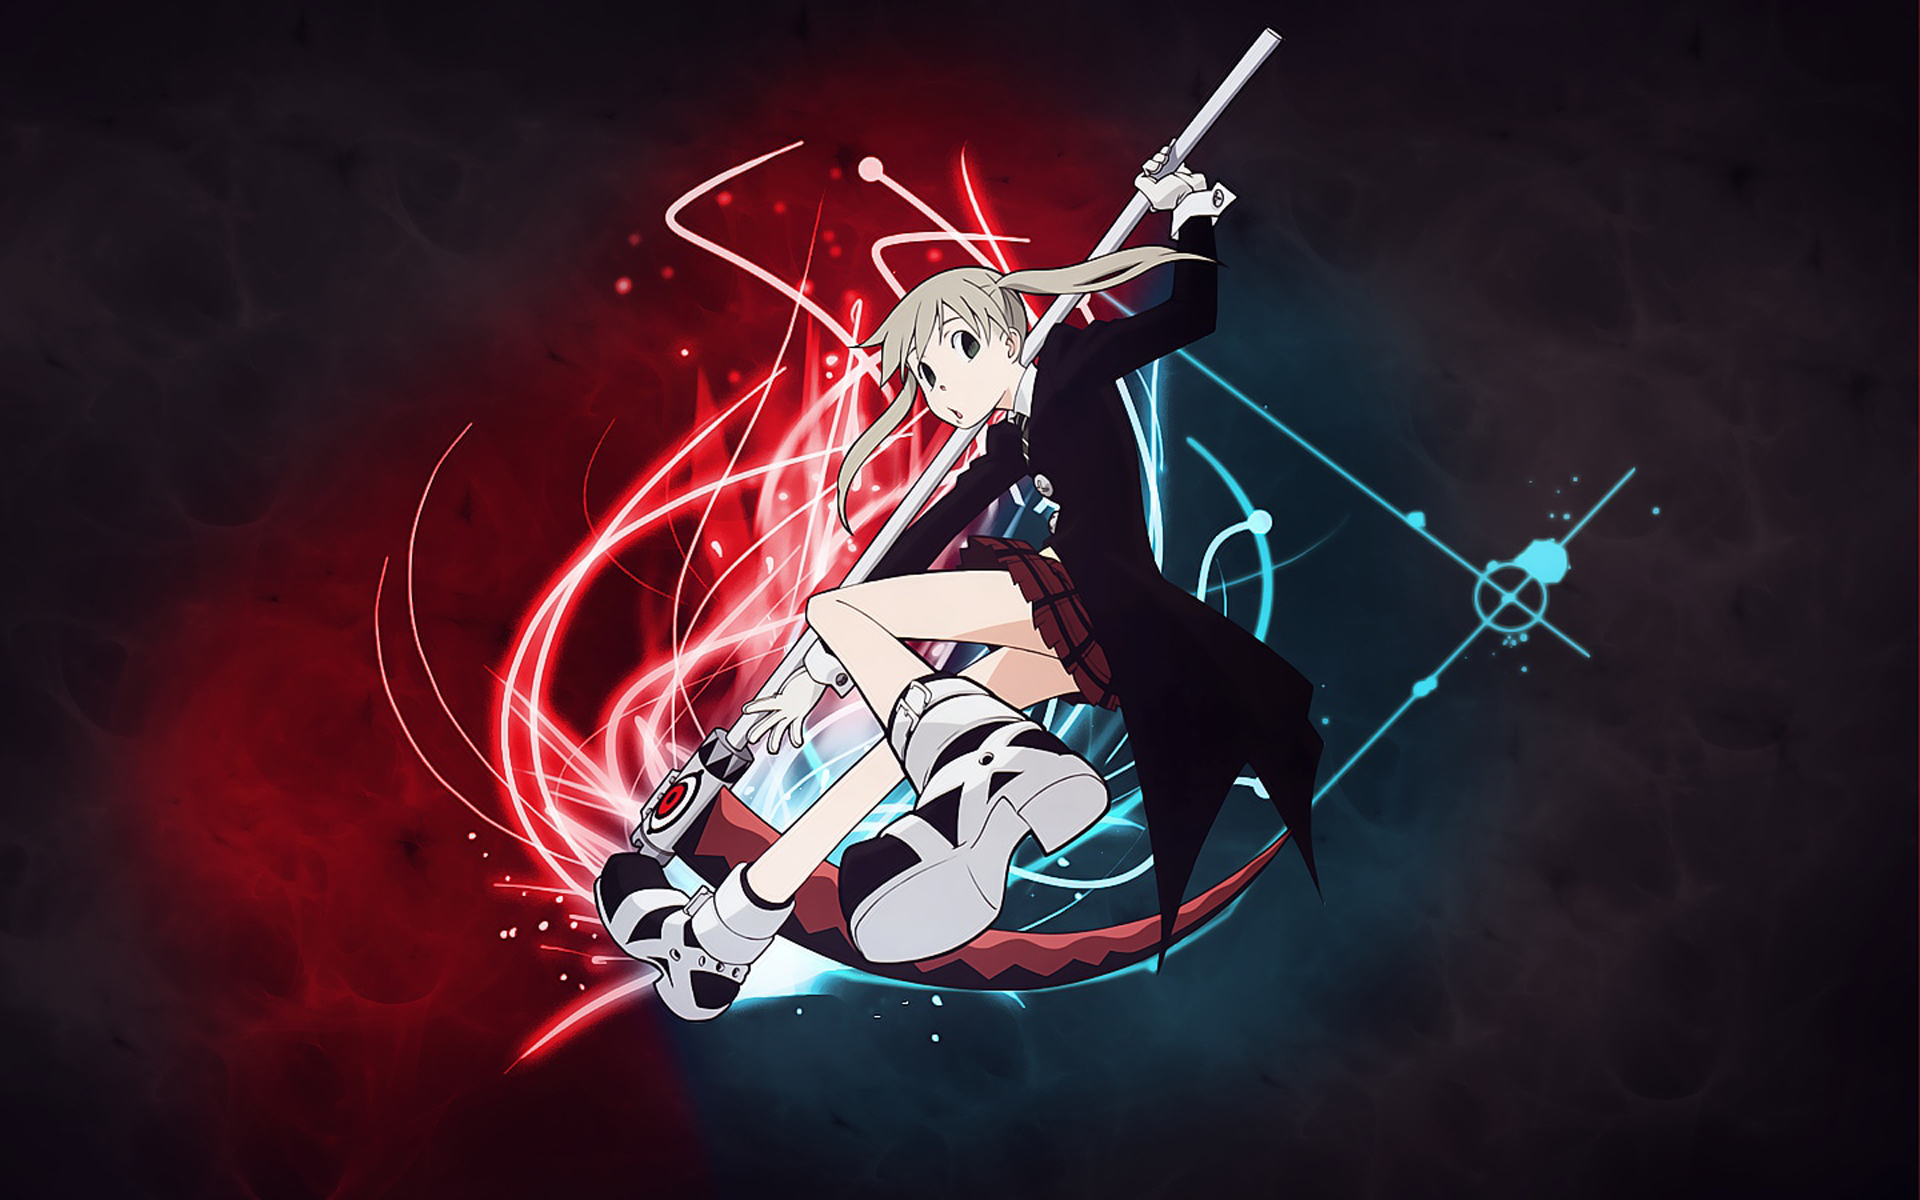 Souleater Souleaterevans Souleateranime Souls Freetoedi  Soul Eater Anime  Logo Transparent PNG  1024x941  Free Download on NicePNG